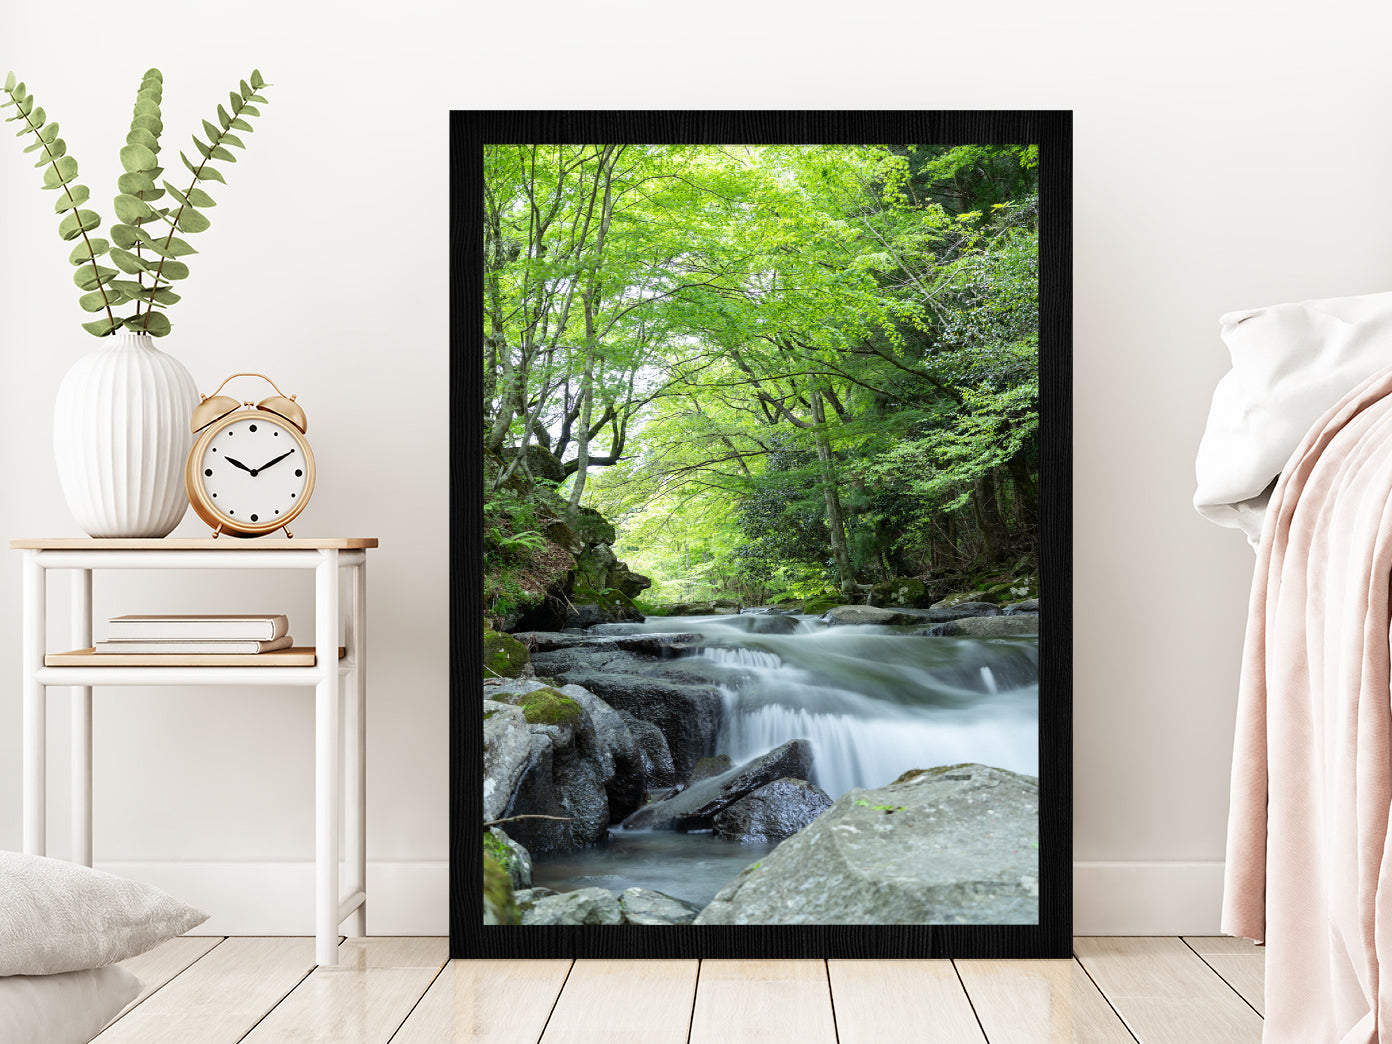 Rocky Riverside With Forest Glass Framed Wall Art, Ready to Hang Quality Print Without White Border Black